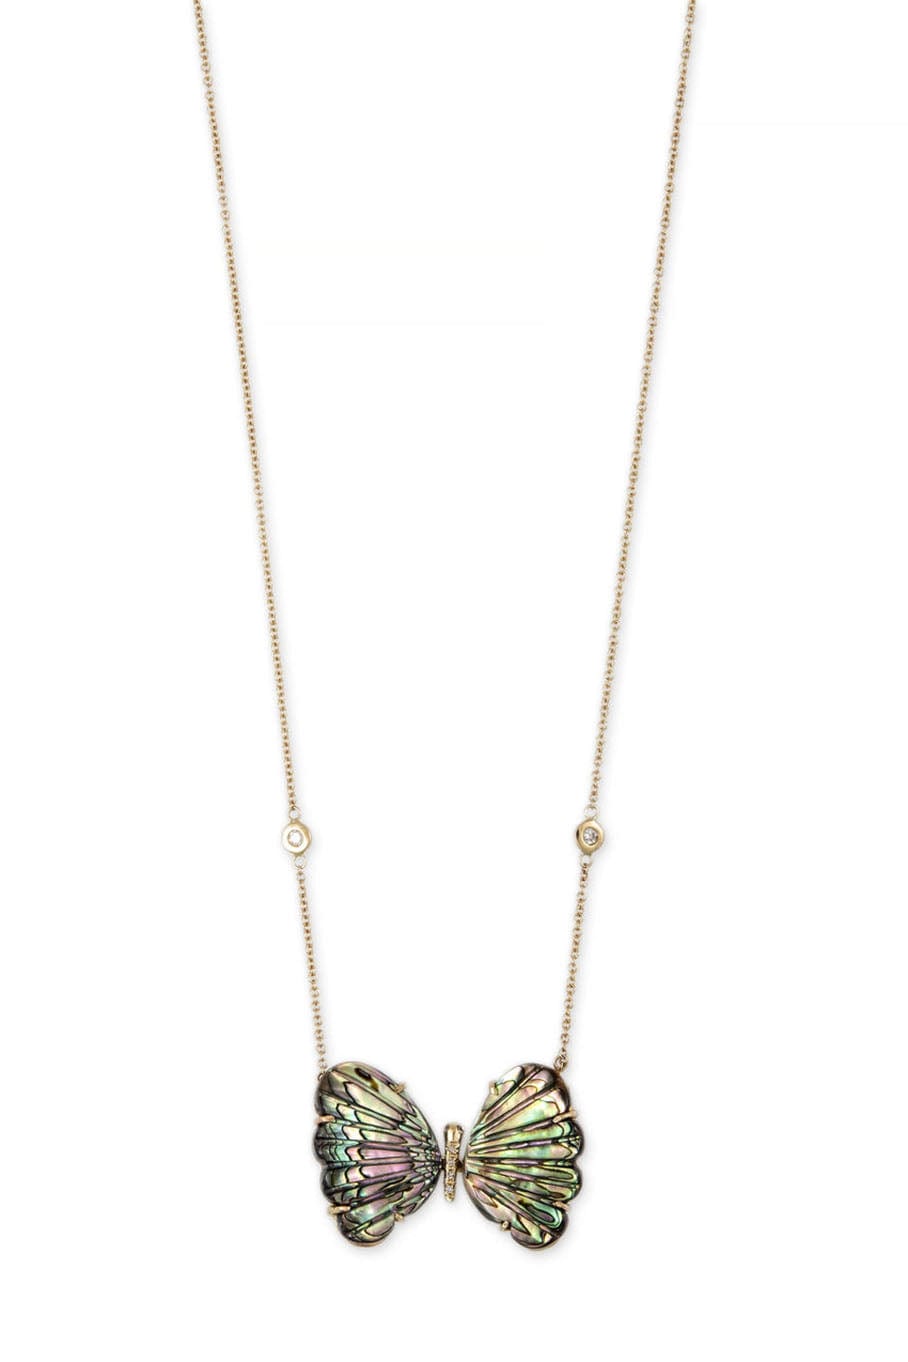 JACQUIE AICHE-Large Abalone & Diamond Butterfly Necklace-YELLOW GOLD